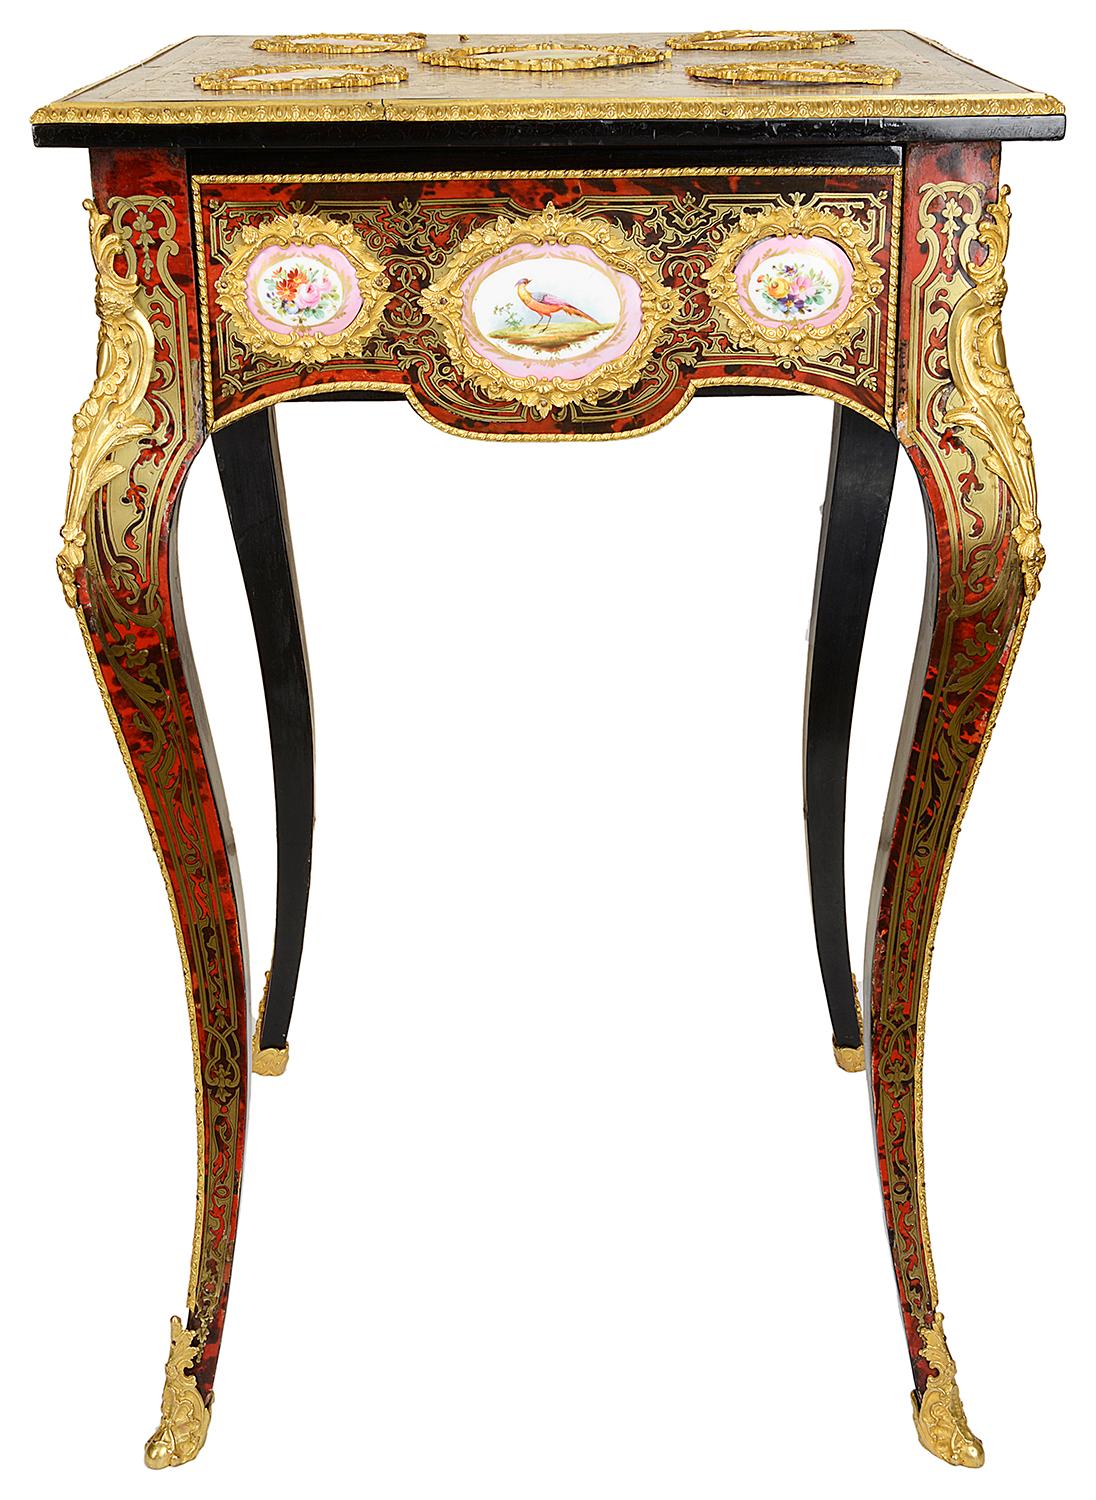 A very good quality 19th century French Boulle inlaid side table, having gilded ormolu mounts, Sevres style porcelain plaques with classical romantic scenes, flowers and birds. The fine scrolling brass inlay to the top and side, a single frieze